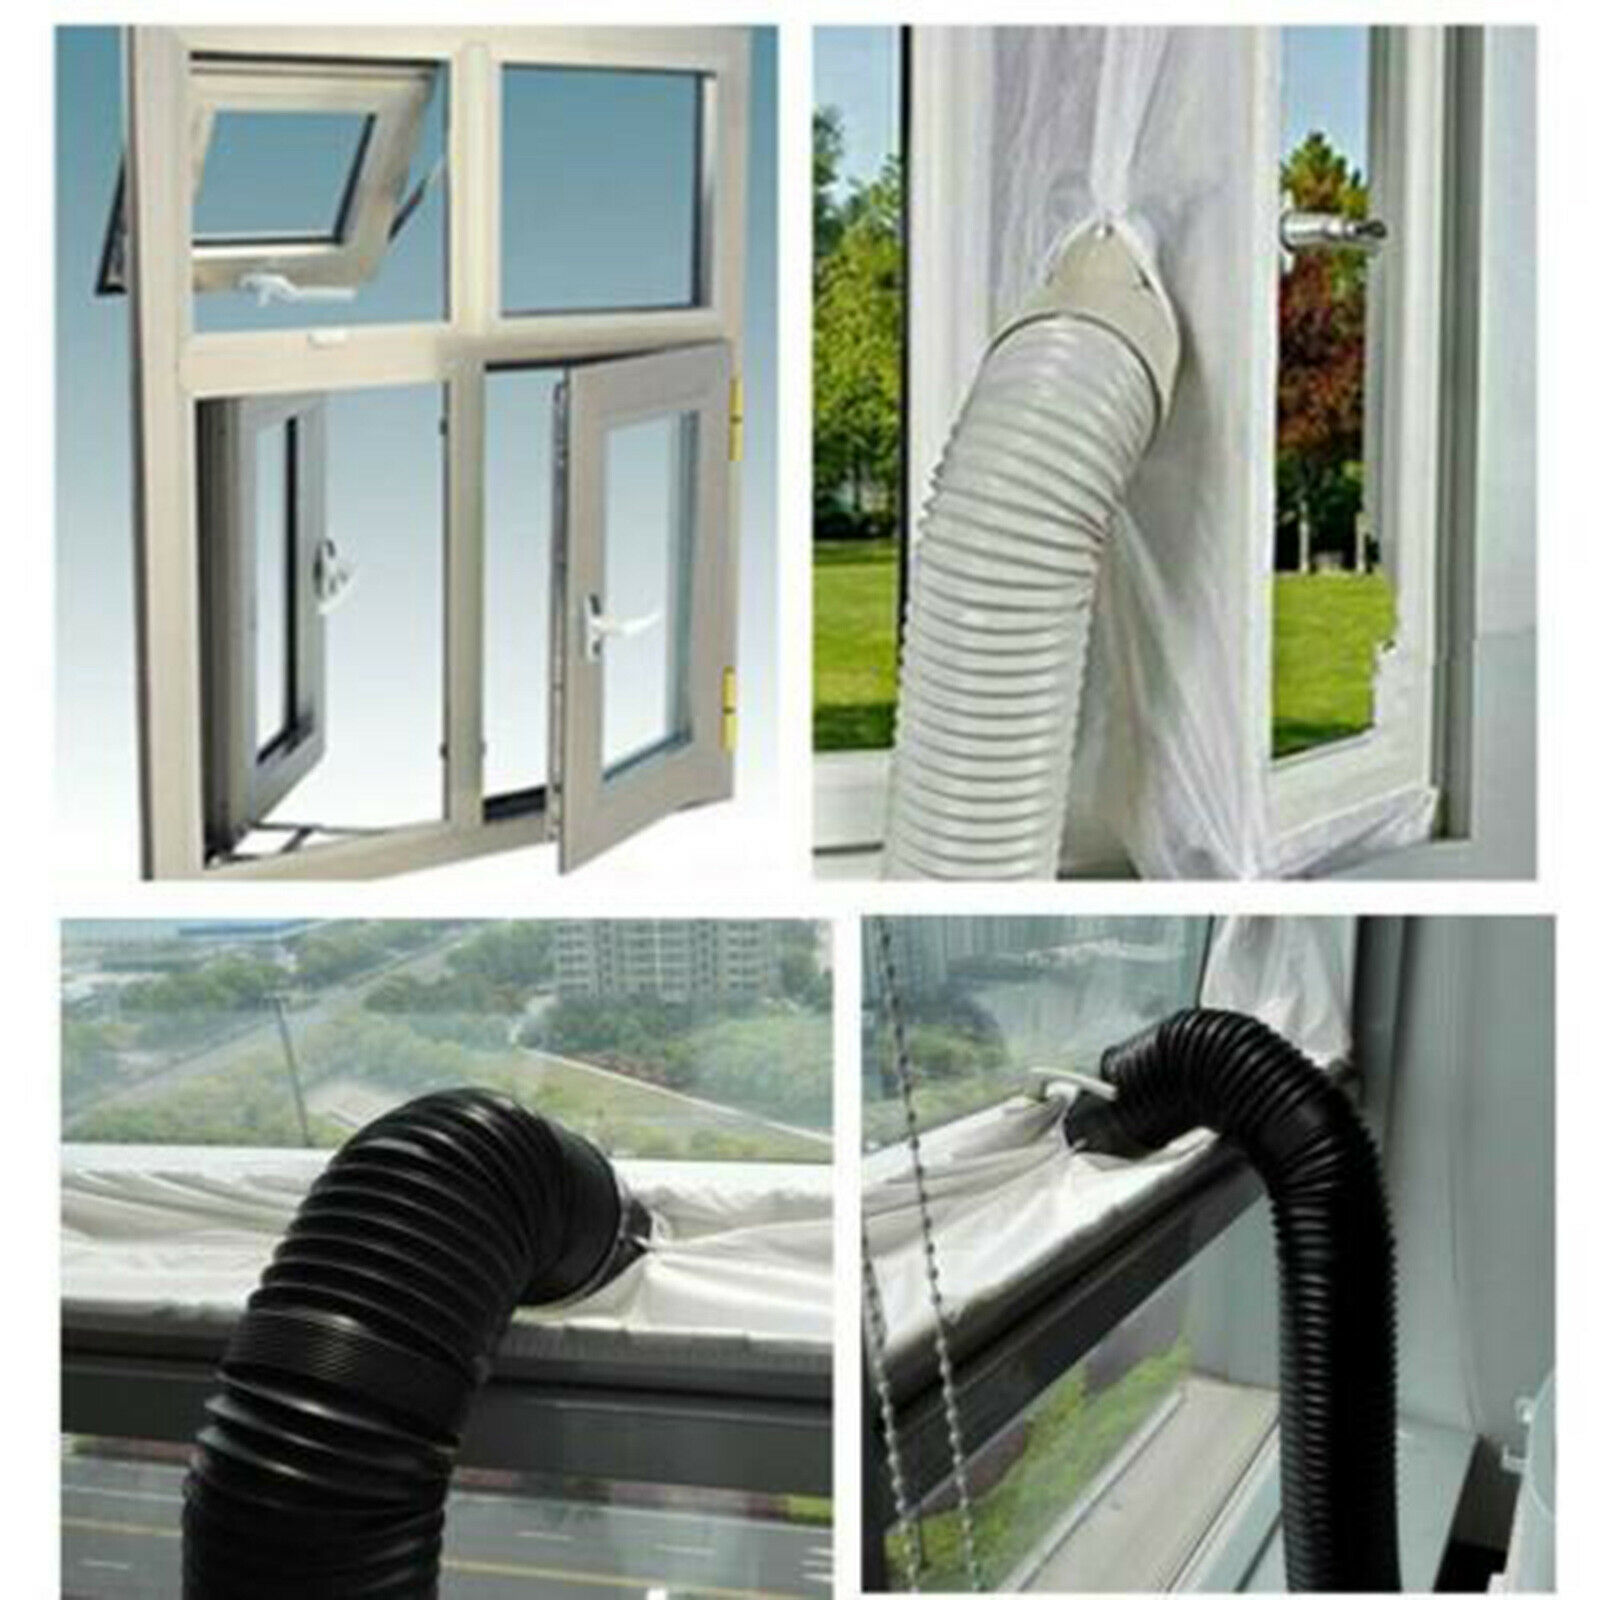 Portable Air Conditioner Small Window Kit Lg Portable Air Conditioner Window Vent Kit